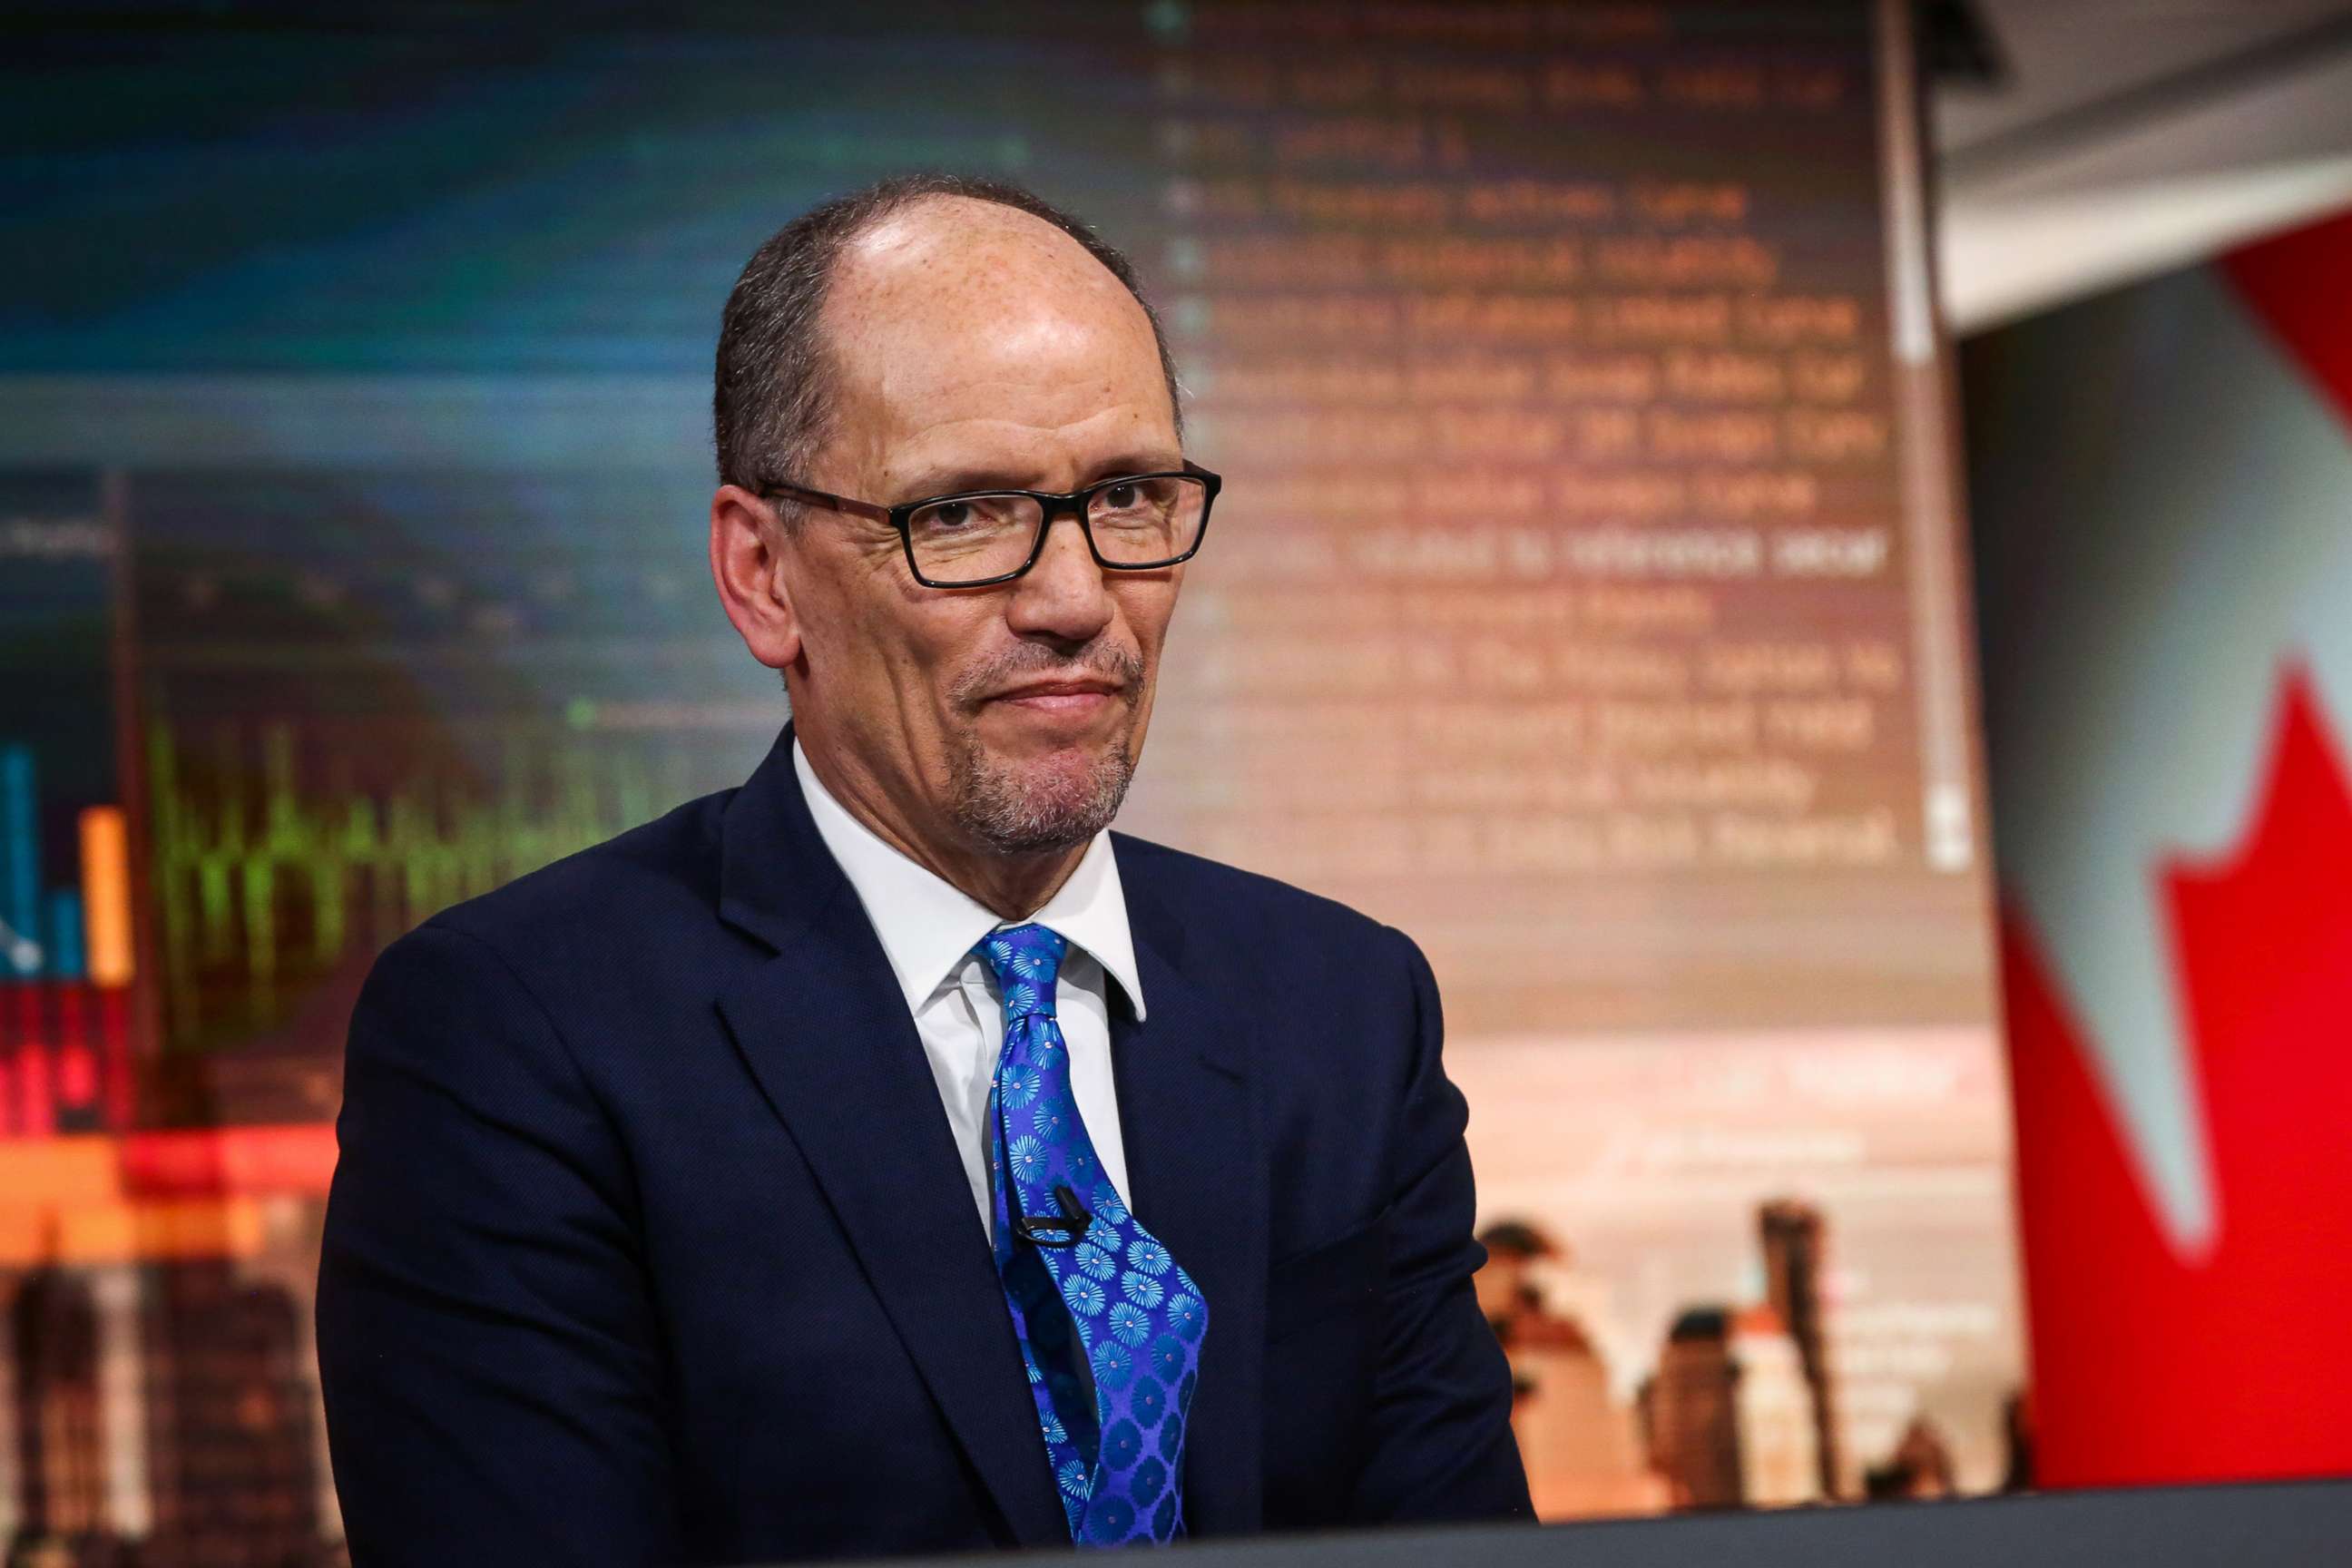 PHOTO: Tom Perez listens during a Bloomberg Television interview in N.Y., Jan. 31, 2018.